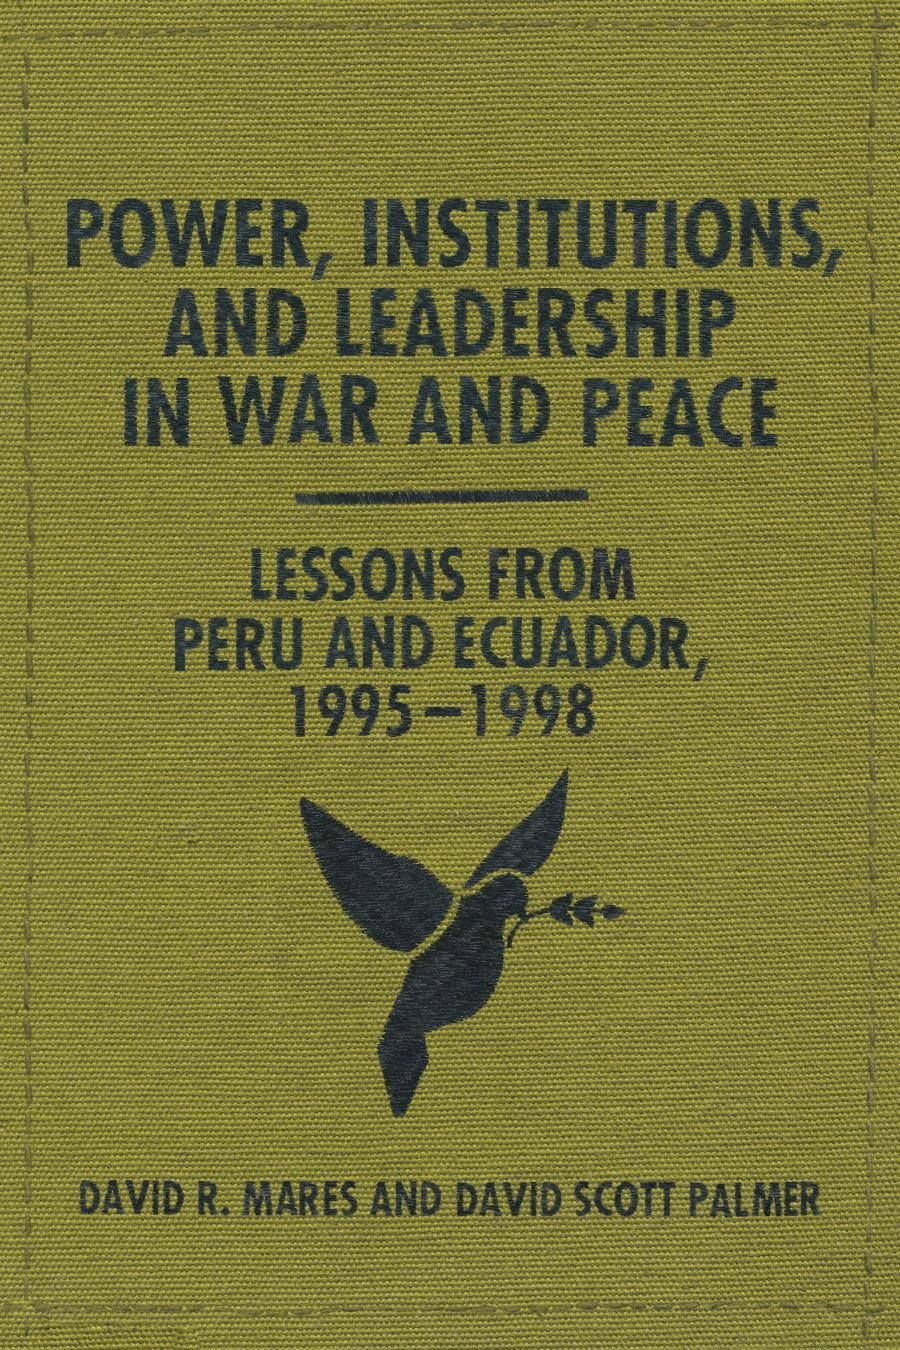 Power, Institutions, and Leadership in War and Peace: Lessons From Peru and Ecuador, 1995–1998